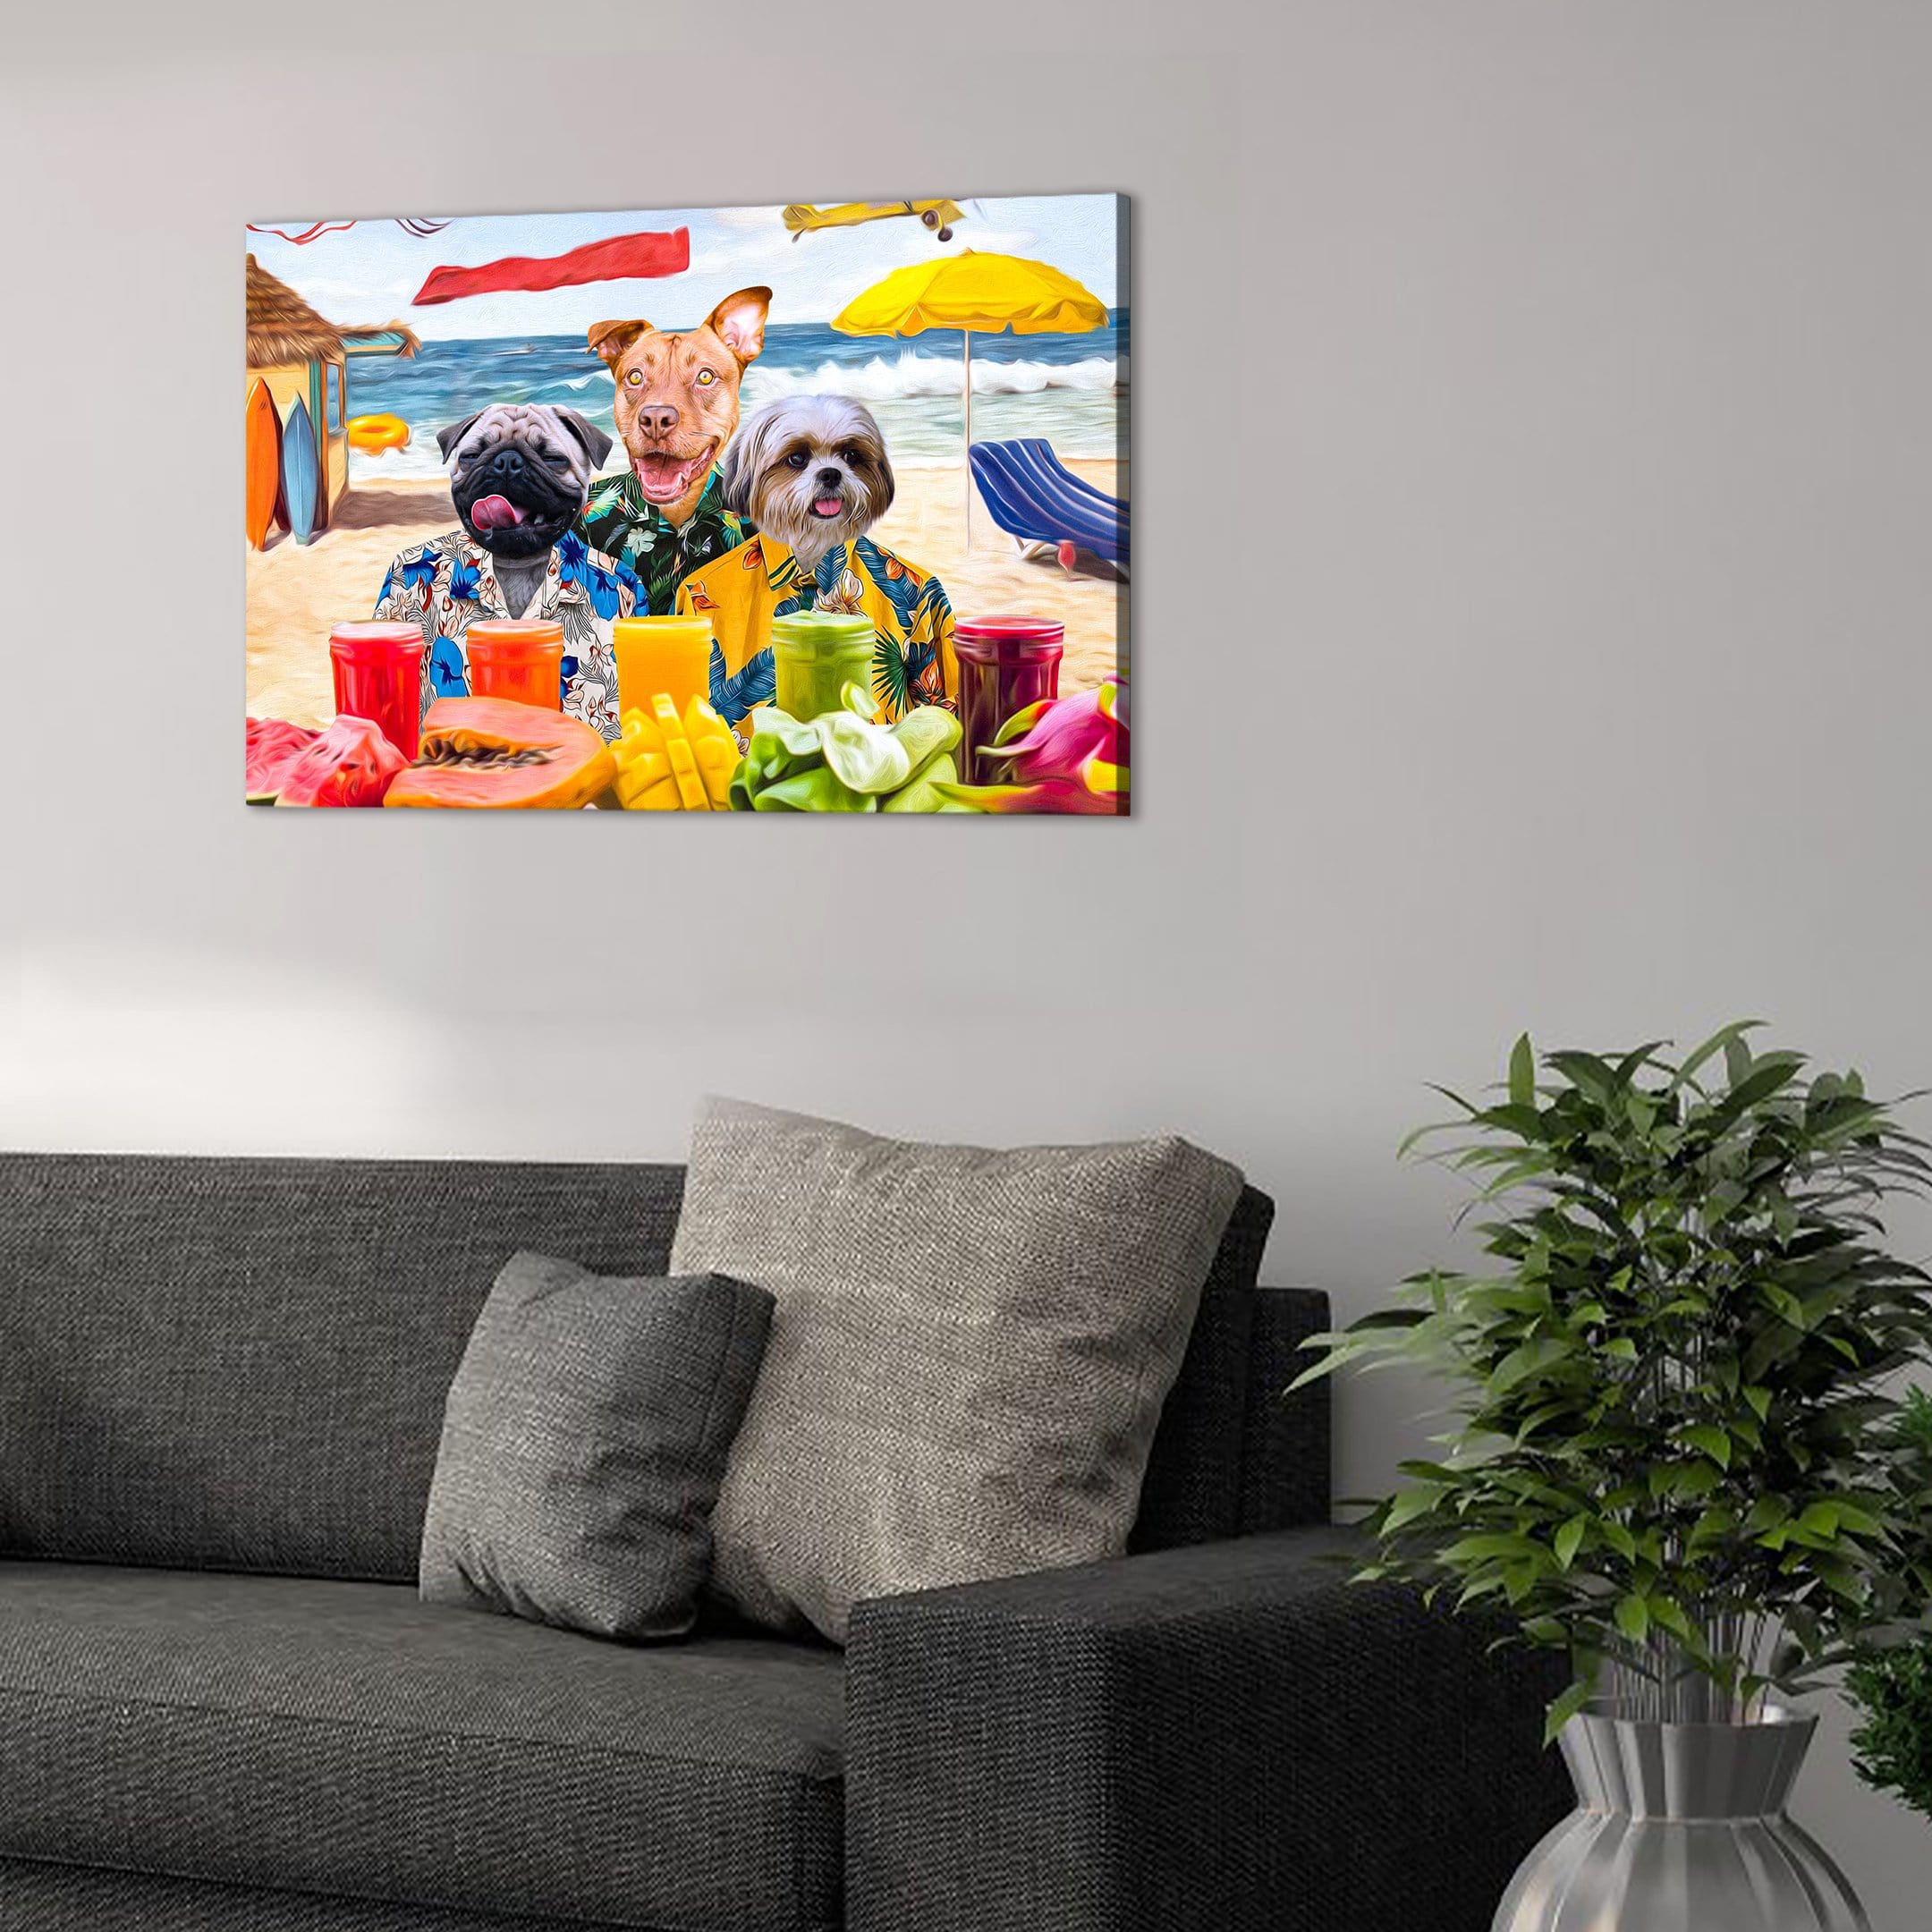 &#39;The Beach Dogs&#39; Personalized 3 Pet Canvas